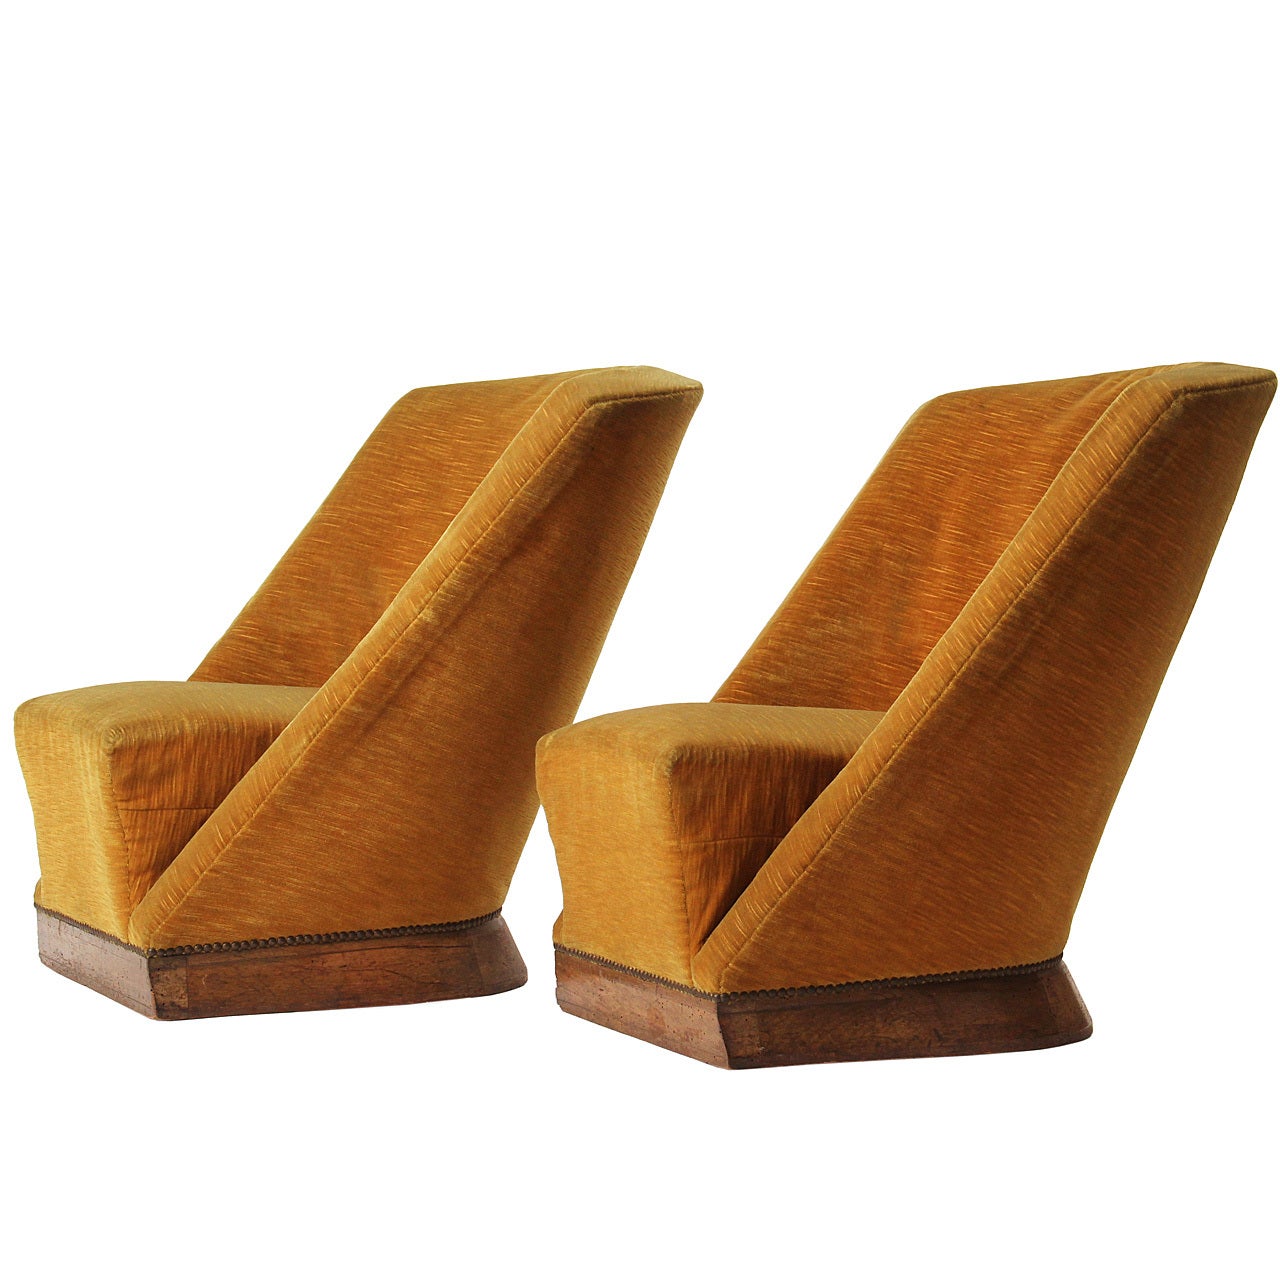 Pair of Slipper Chairs by Louis Sognot